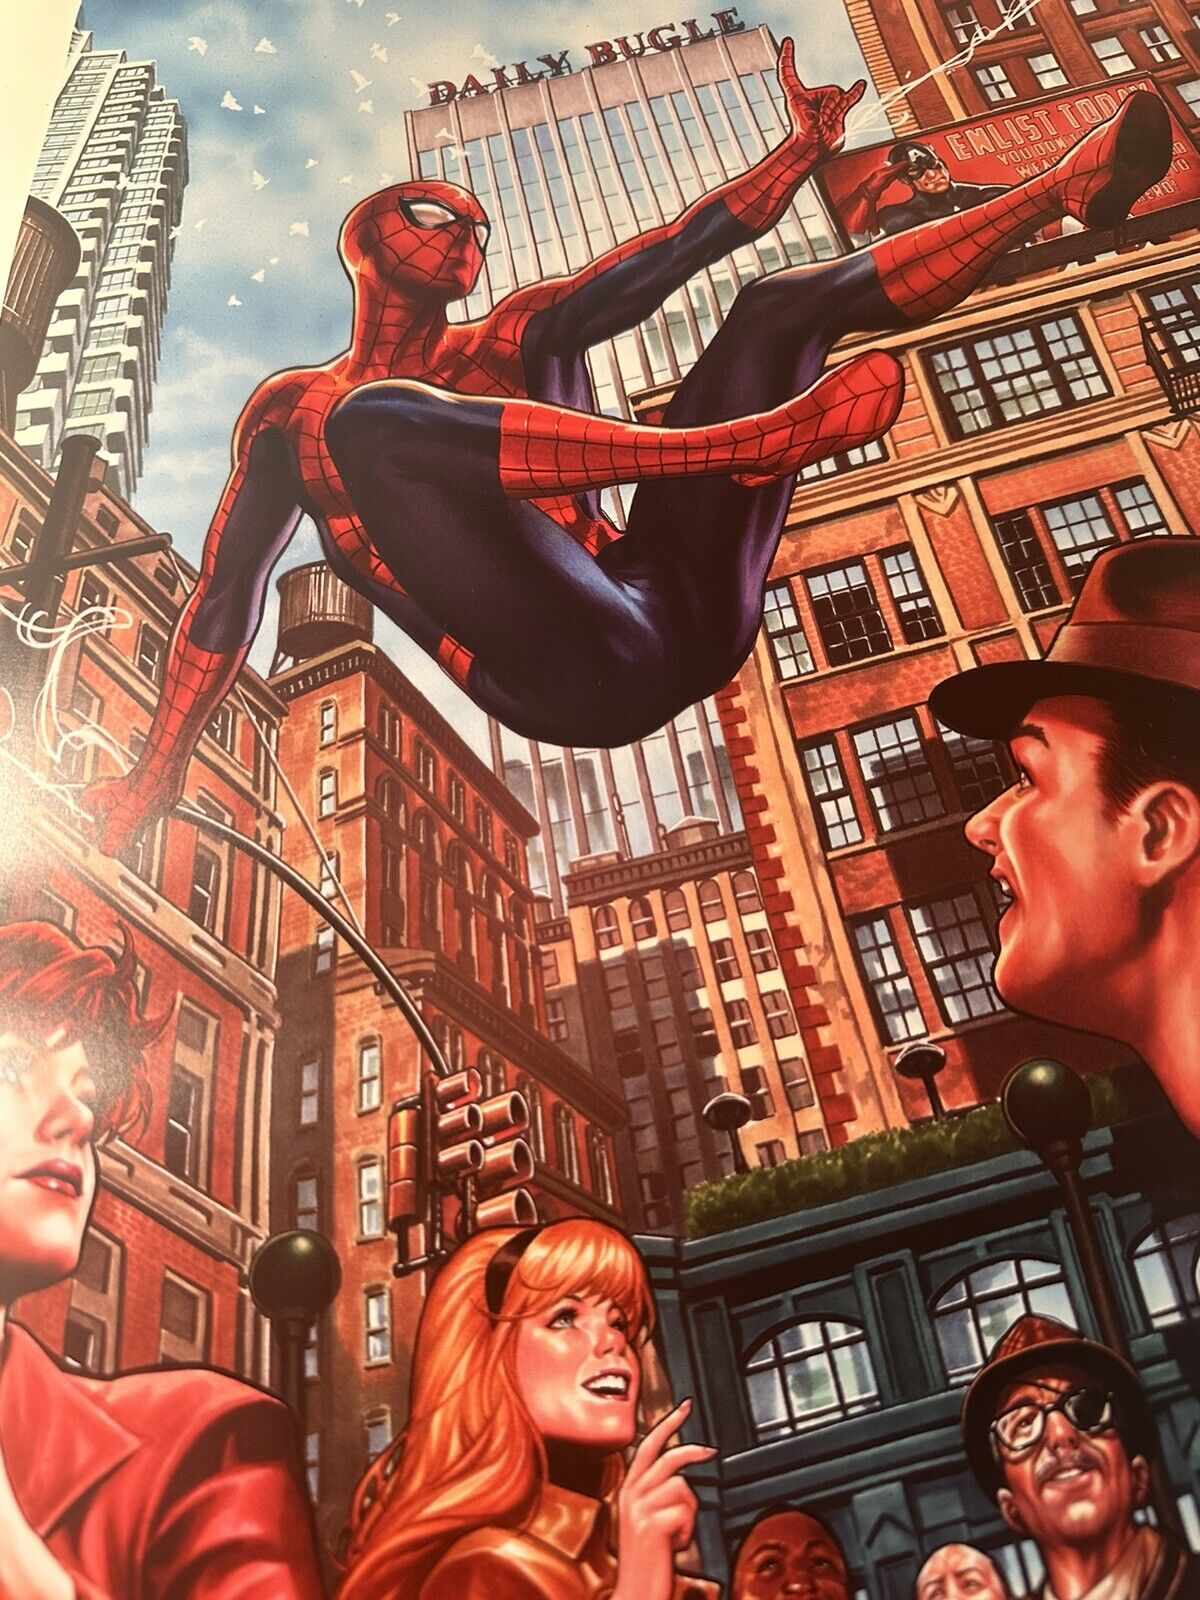 THE AMAZING SPIDER-MAN # 24 (LGY # 825 BROOKS VARIANT 2019 MARVEL POSTER)